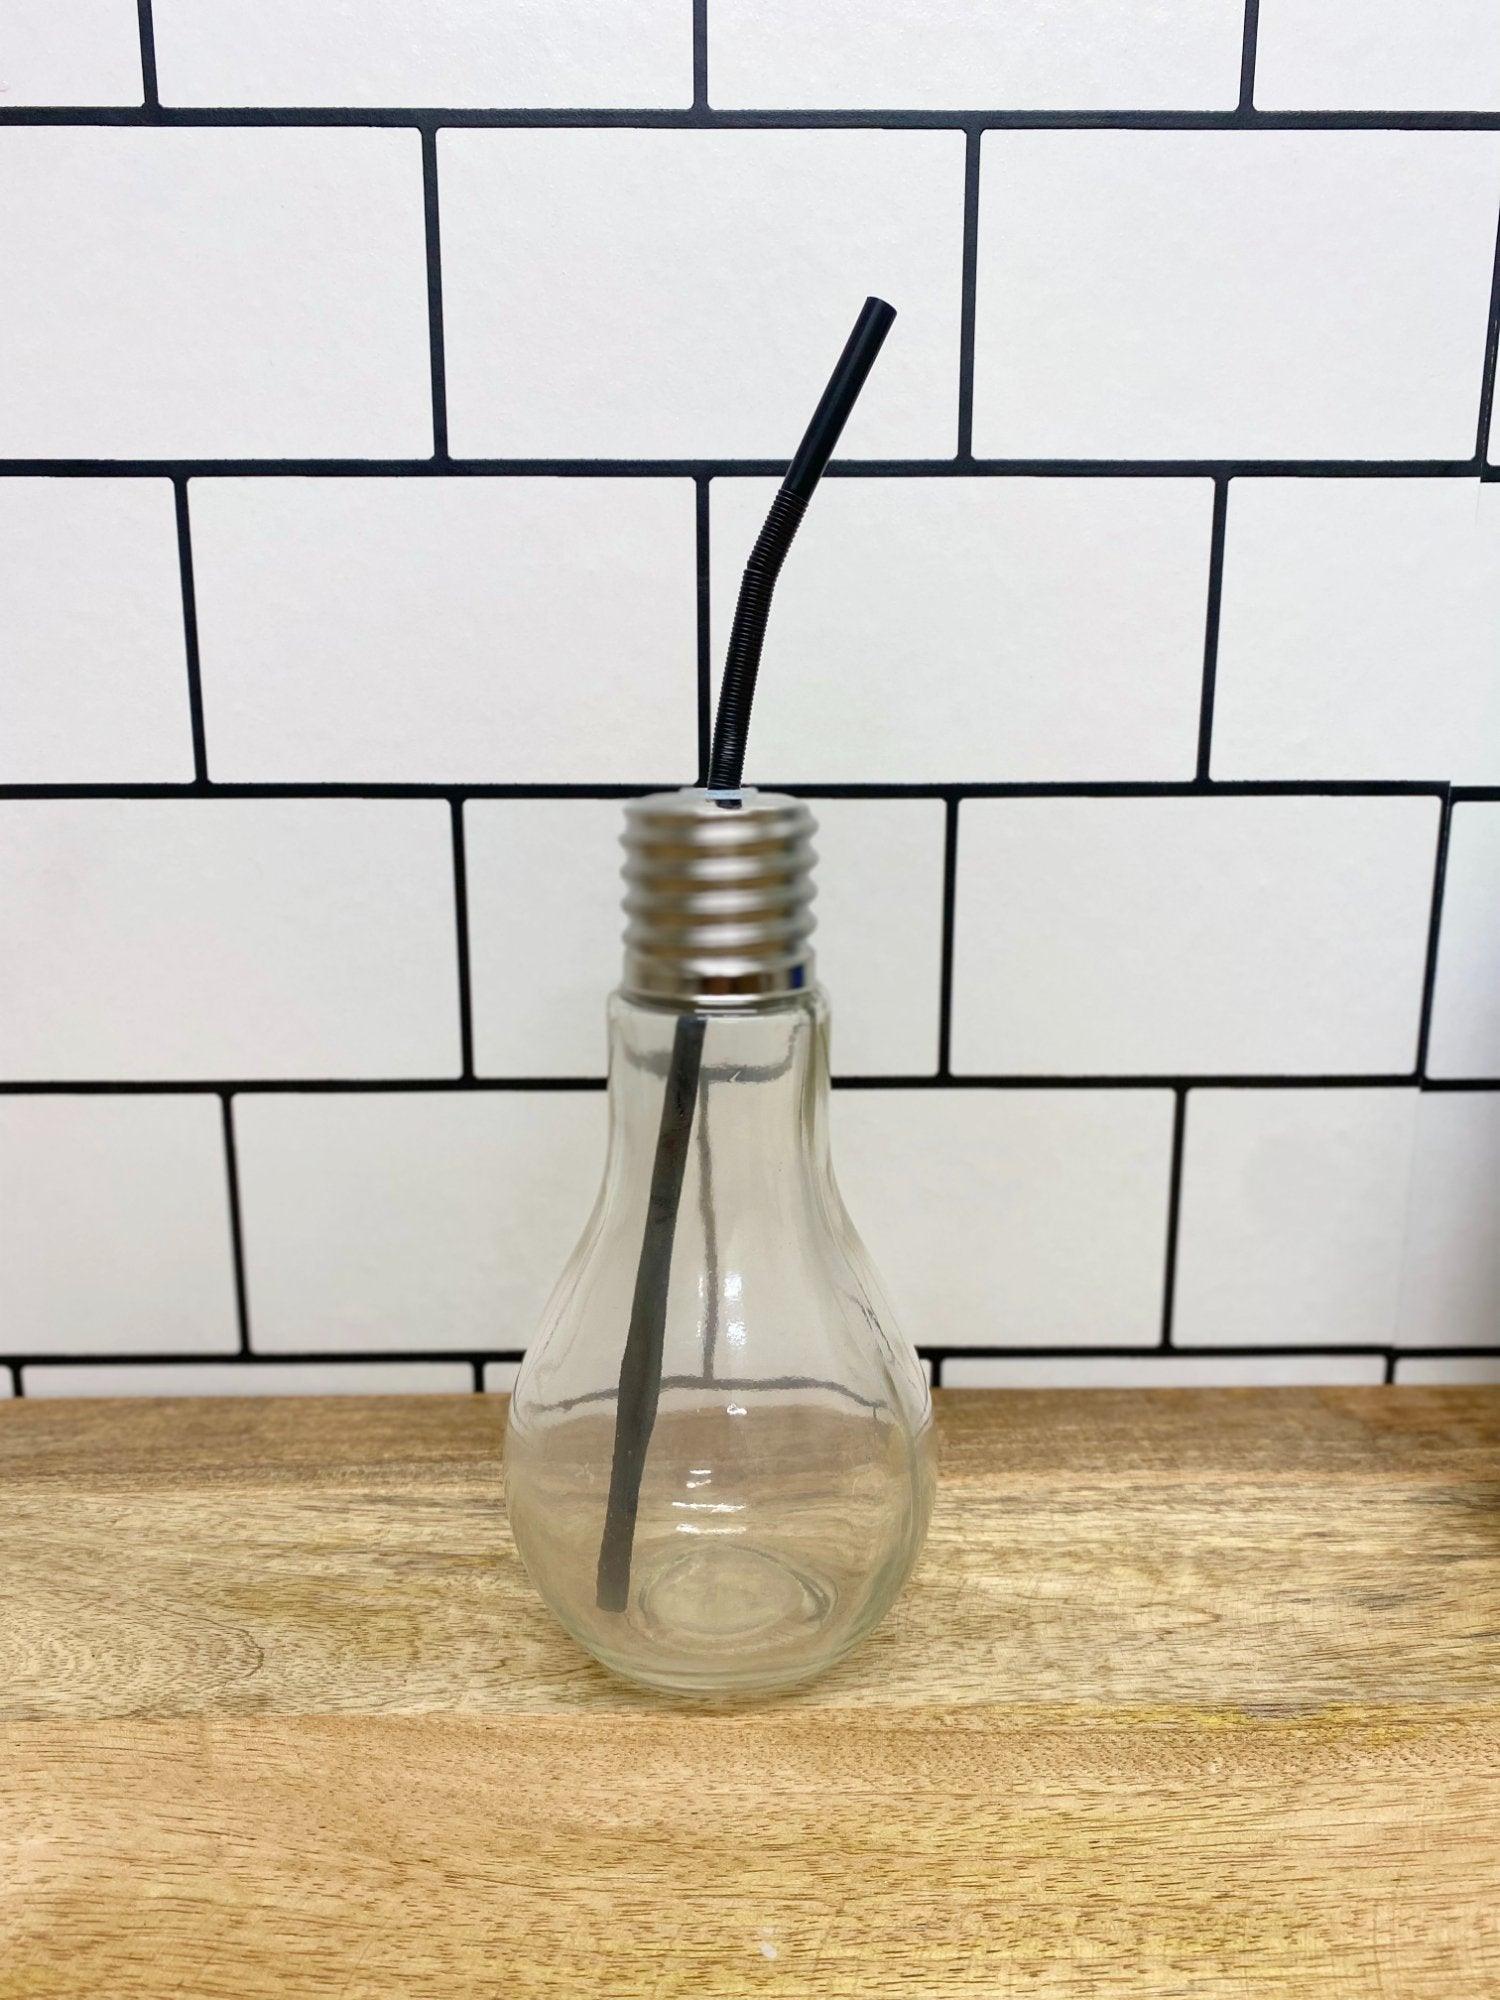 View Light Bulb Drinking Jar with Straw information